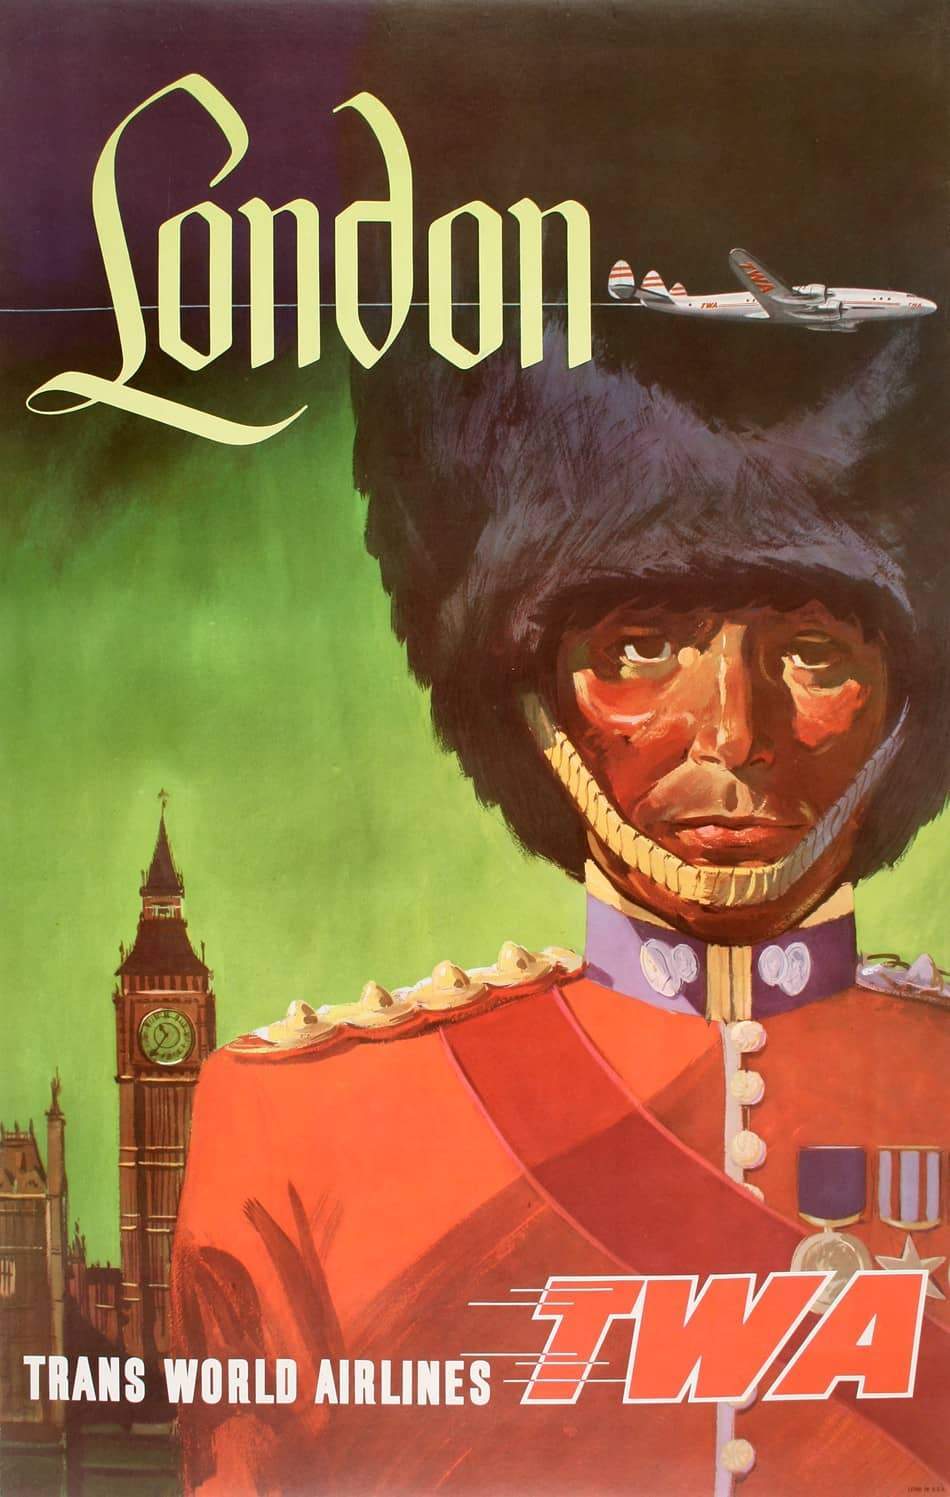 Vintage TWA Poster C1954 for Travel to London - Royal Guard